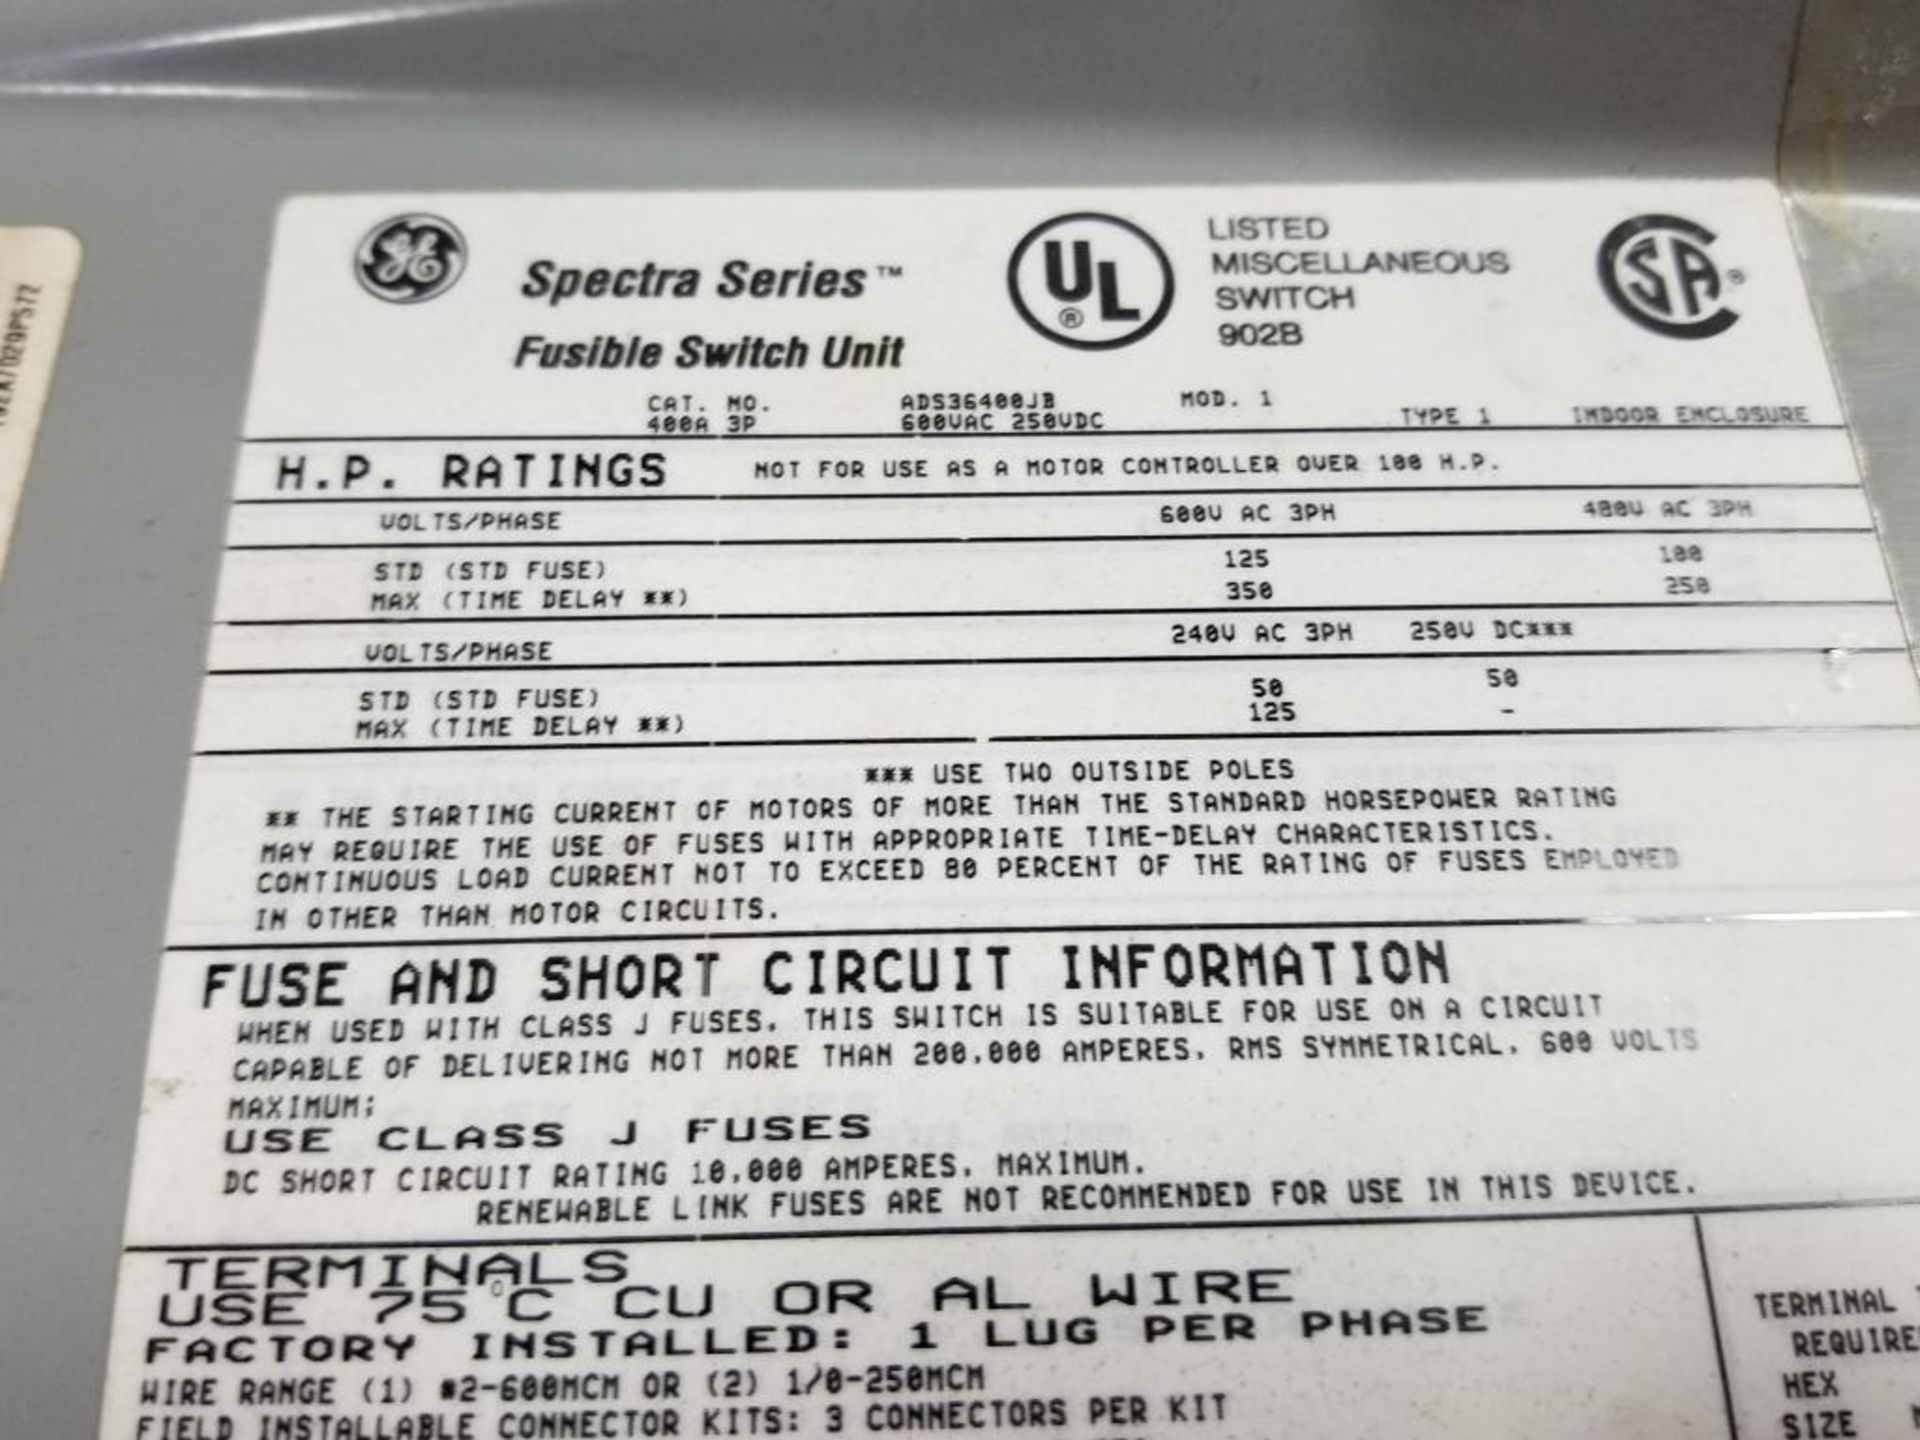 GE Spectra Series fusible switch unit. ADS36400JB. 400AMP. - Image 5 of 5